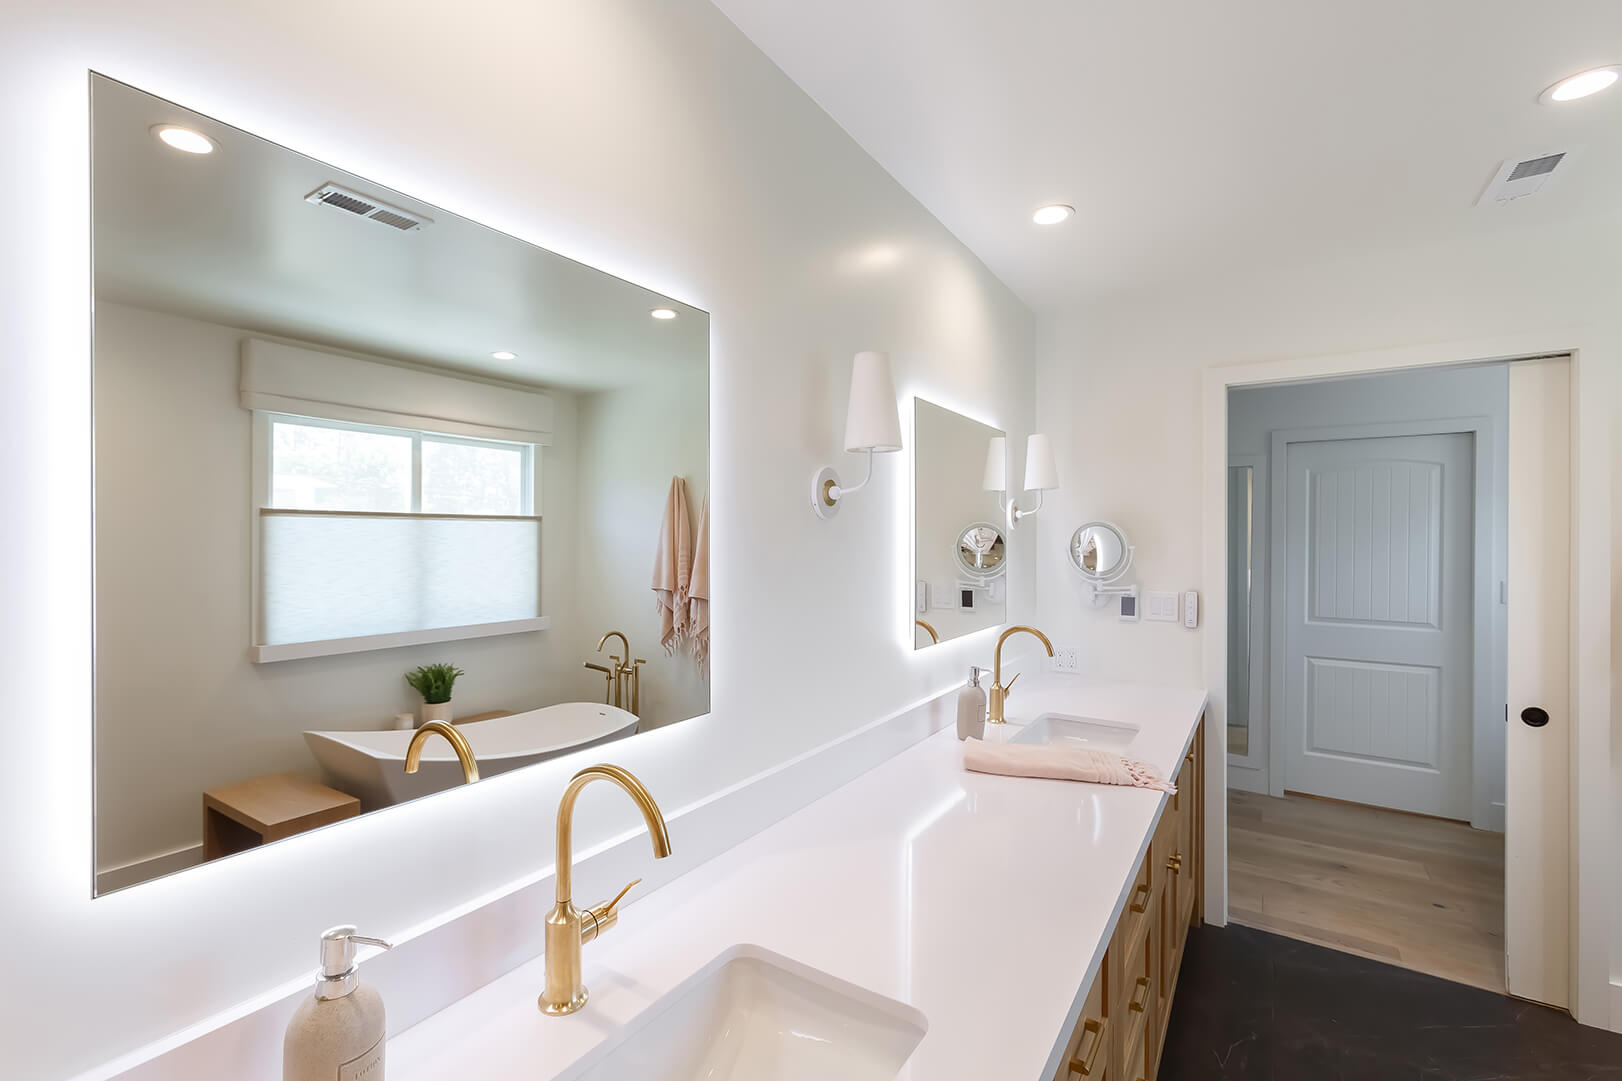 Hastings-Tile-Bath-Aurora-Mirrors-and-Chelsea-Tub-PHOTO-CREDIT-to-HILLARY-CAMPBELL